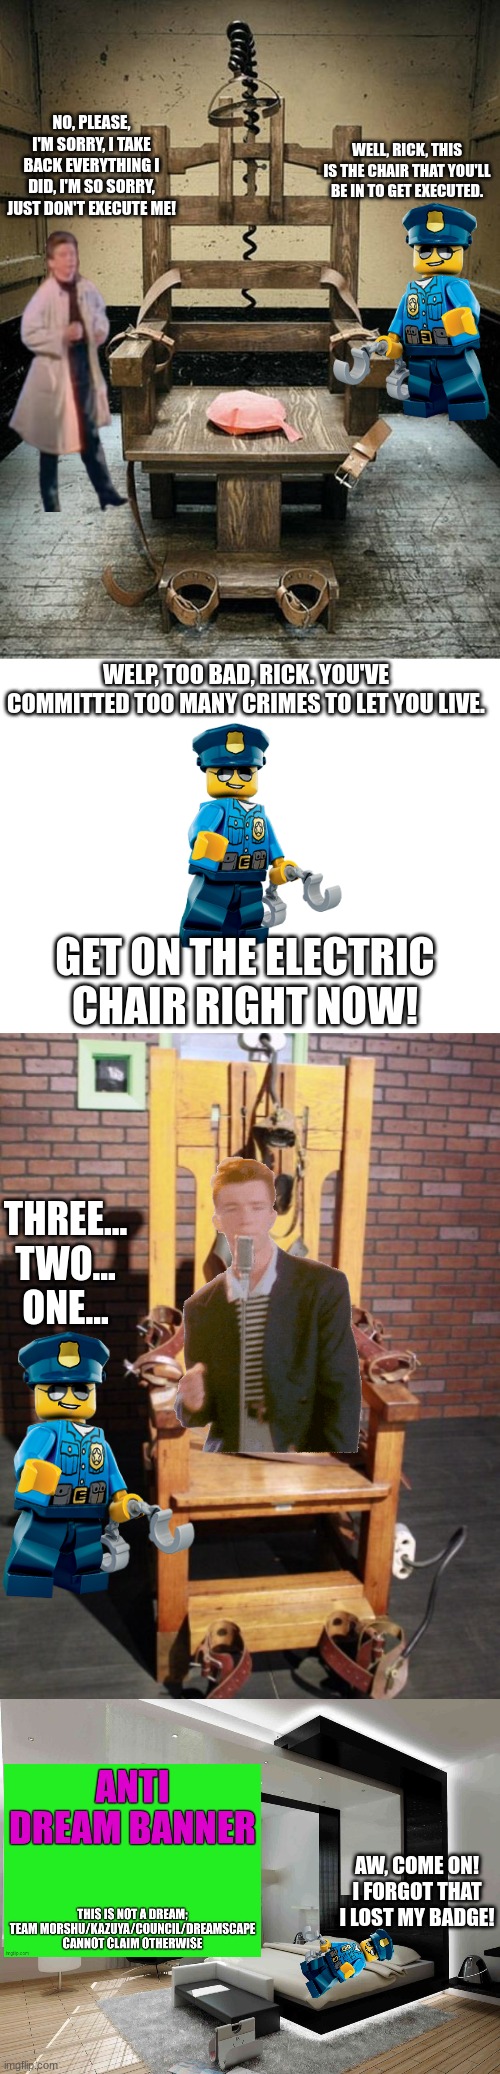 What really happened with the execution | NO, PLEASE, I'M SORRY, I TAKE BACK EVERYTHING I DID, I'M SO SORRY, JUST DON'T EXECUTE ME! WELL, RICK, THIS IS THE CHAIR THAT YOU'LL BE IN TO GET EXECUTED. WELP, TOO BAD, RICK. YOU'VE COMMITTED TOO MANY CRIMES TO LET YOU LIVE. GET ON THE ELECTRIC CHAIR RIGHT NOW! THREE... TWO... ONE... AW, COME ON! I FORGOT THAT I LOST MY BADGE! | image tagged in electric chair,blank white template,bedroom | made w/ Imgflip meme maker